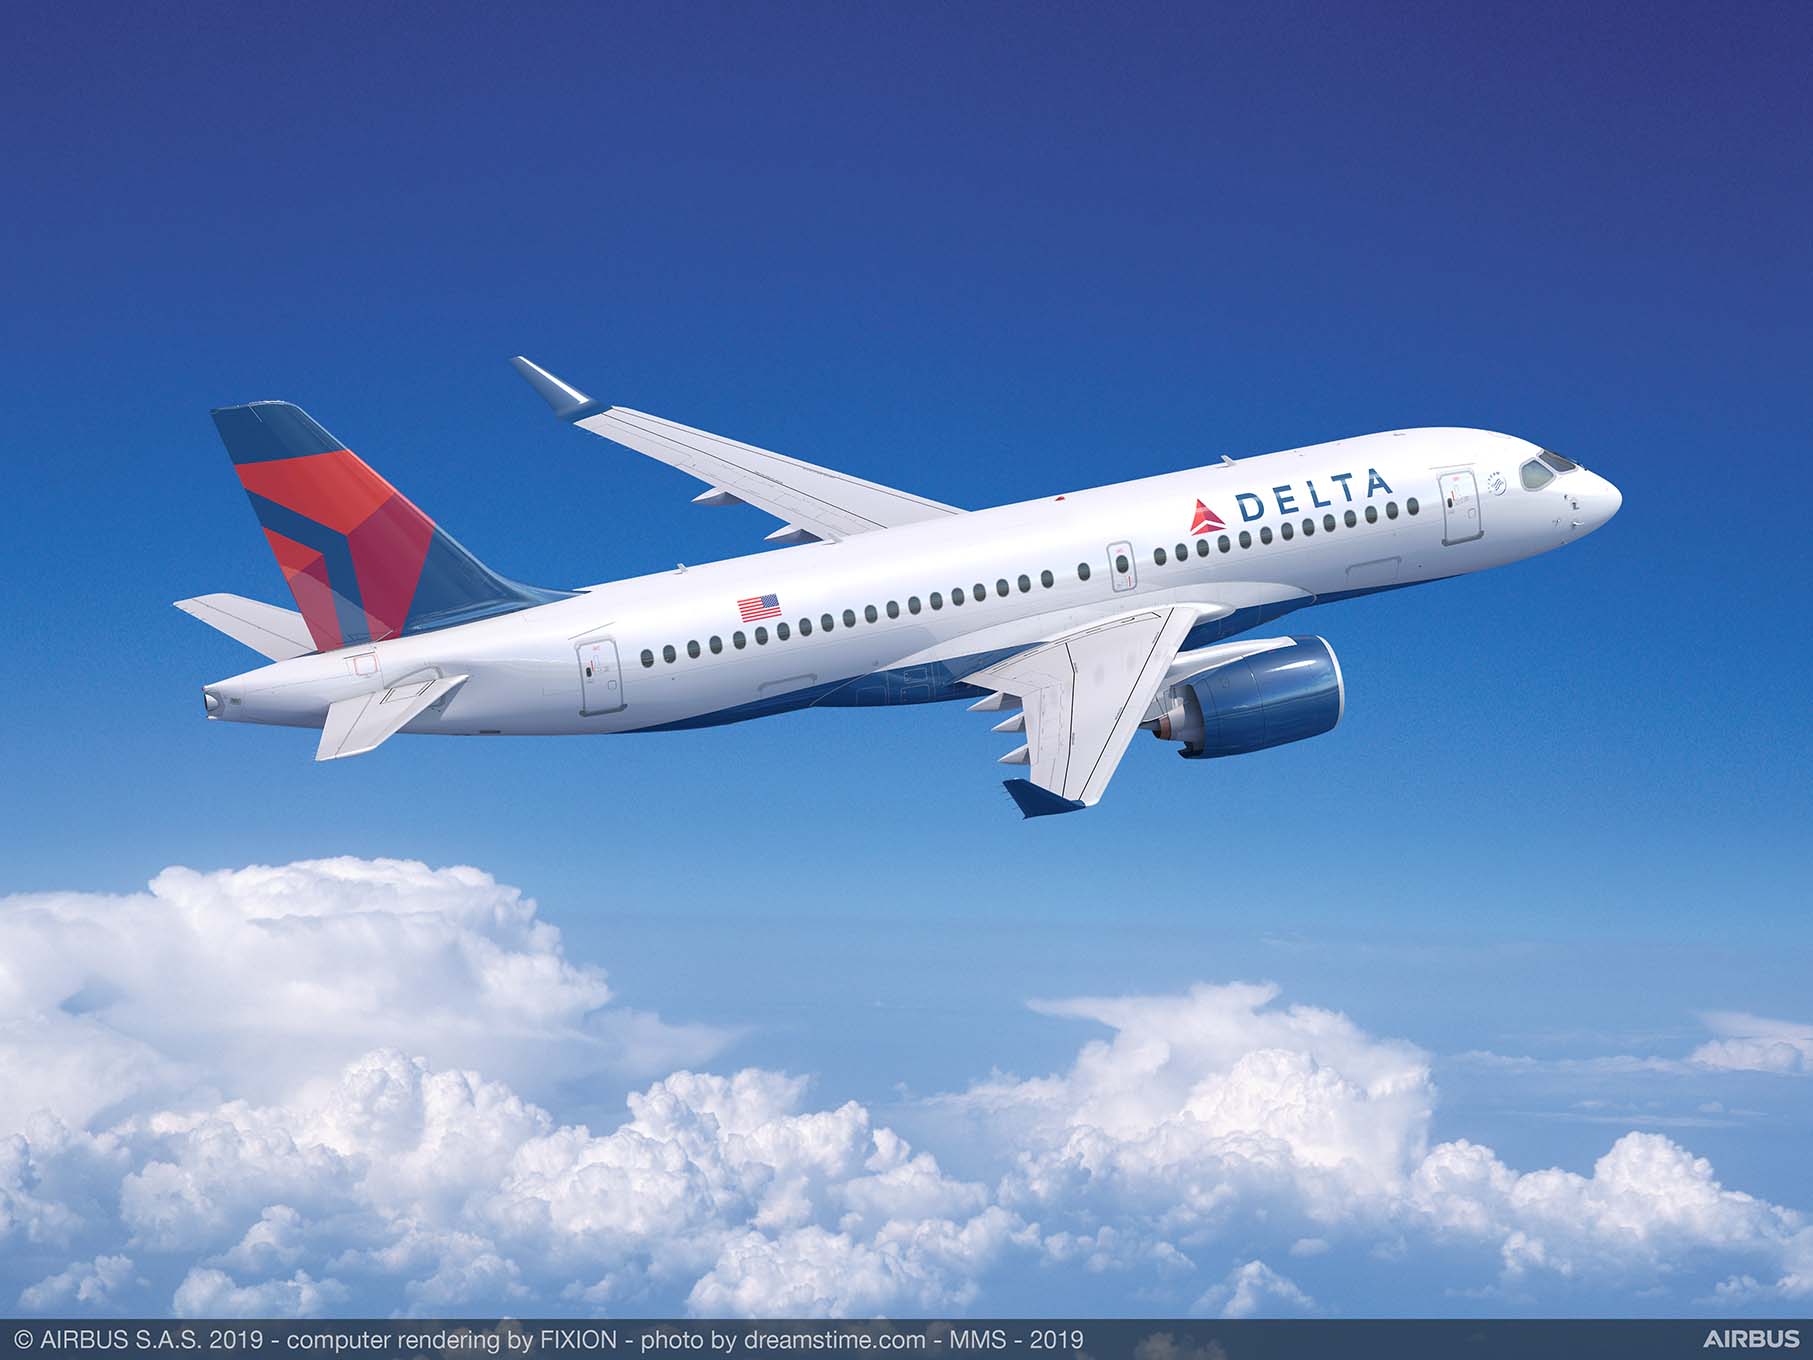 Codeshare agreement introduced between Silver and Delta